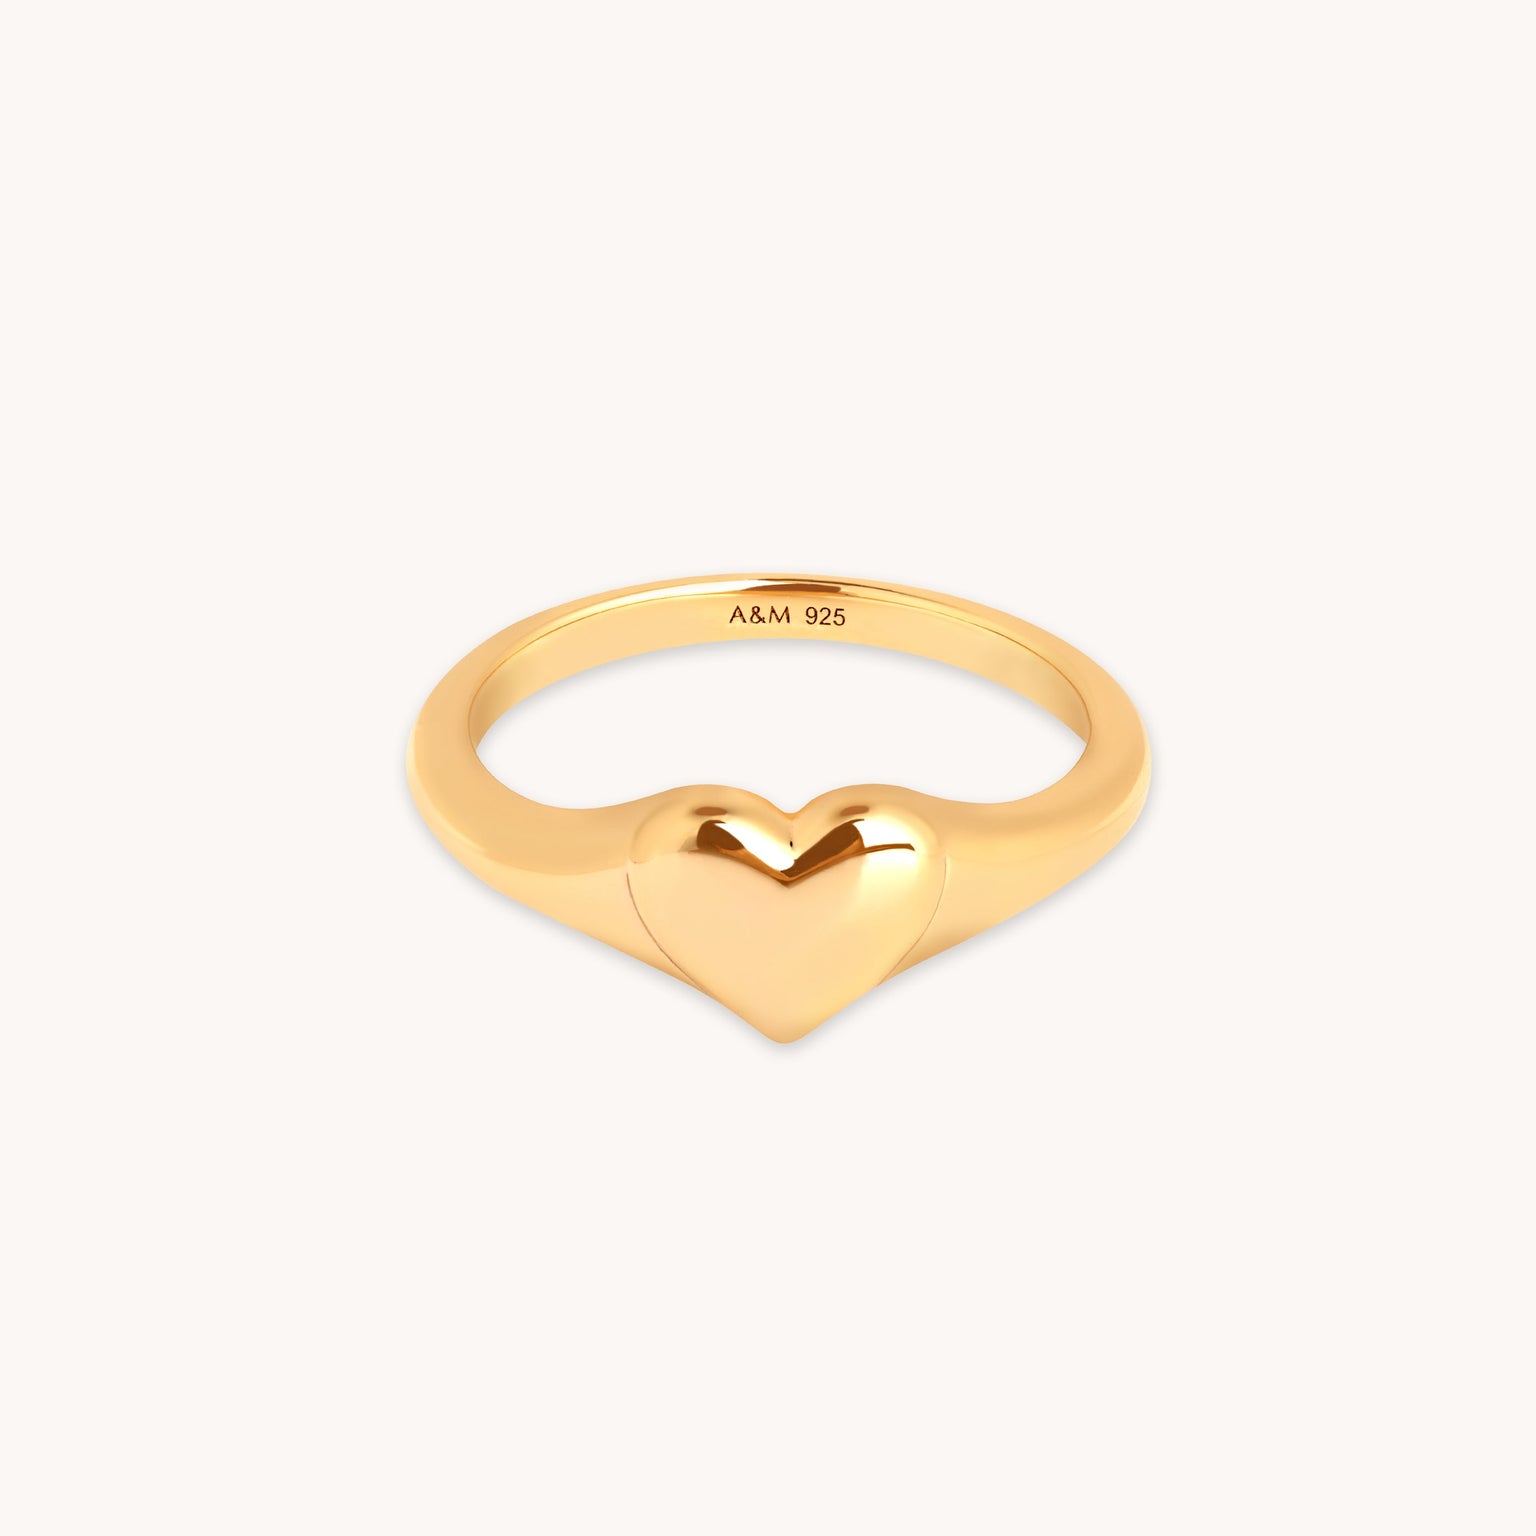 Heart Signet Ring in Gold